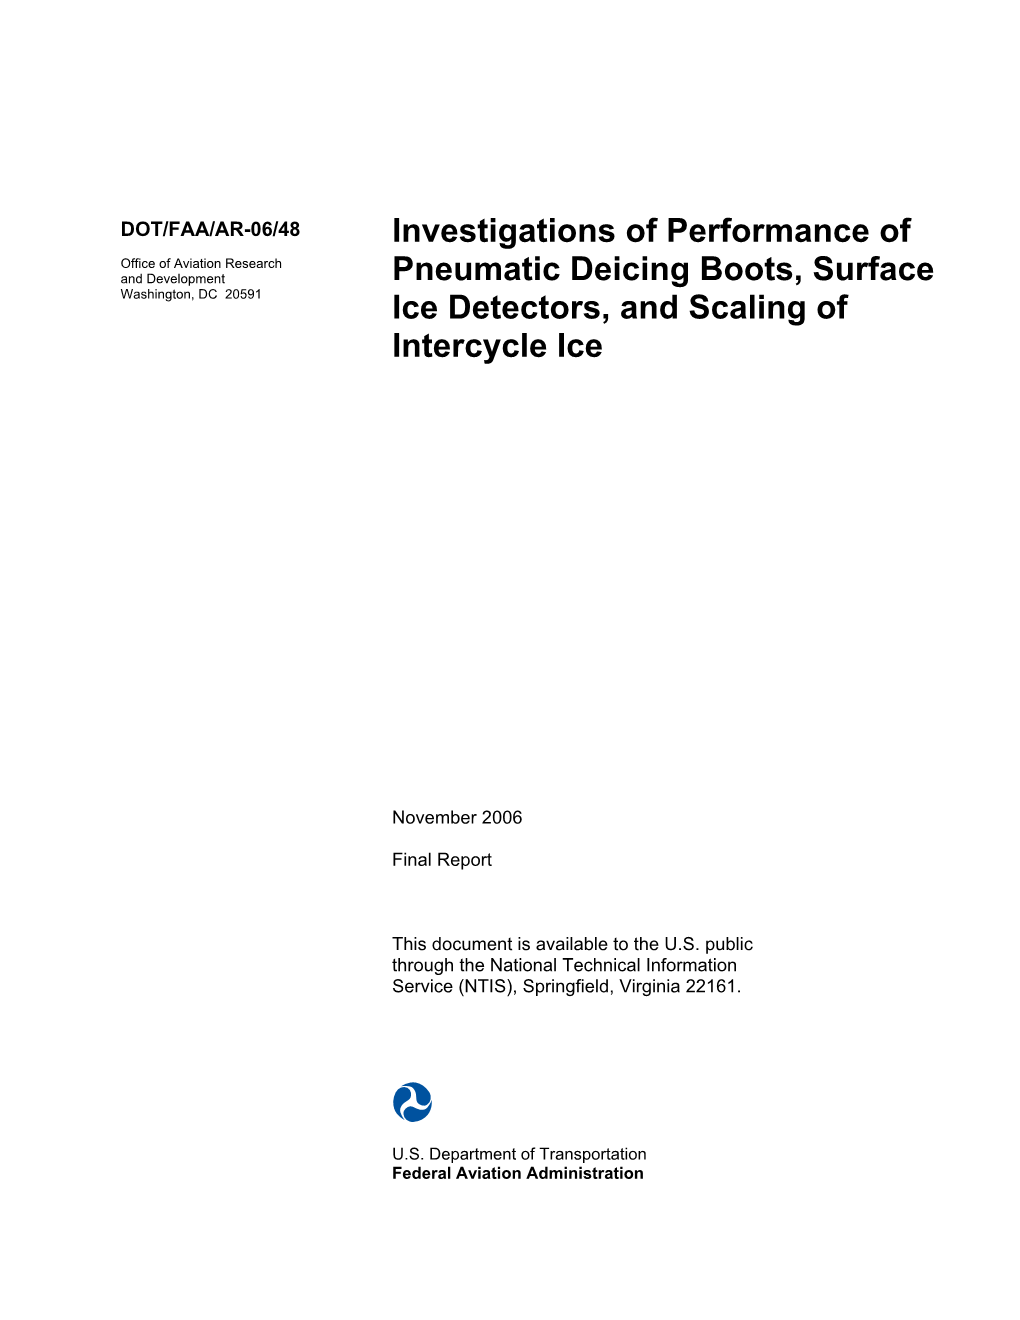 Investigations of Performance of Deicing Boots, Surface Ice